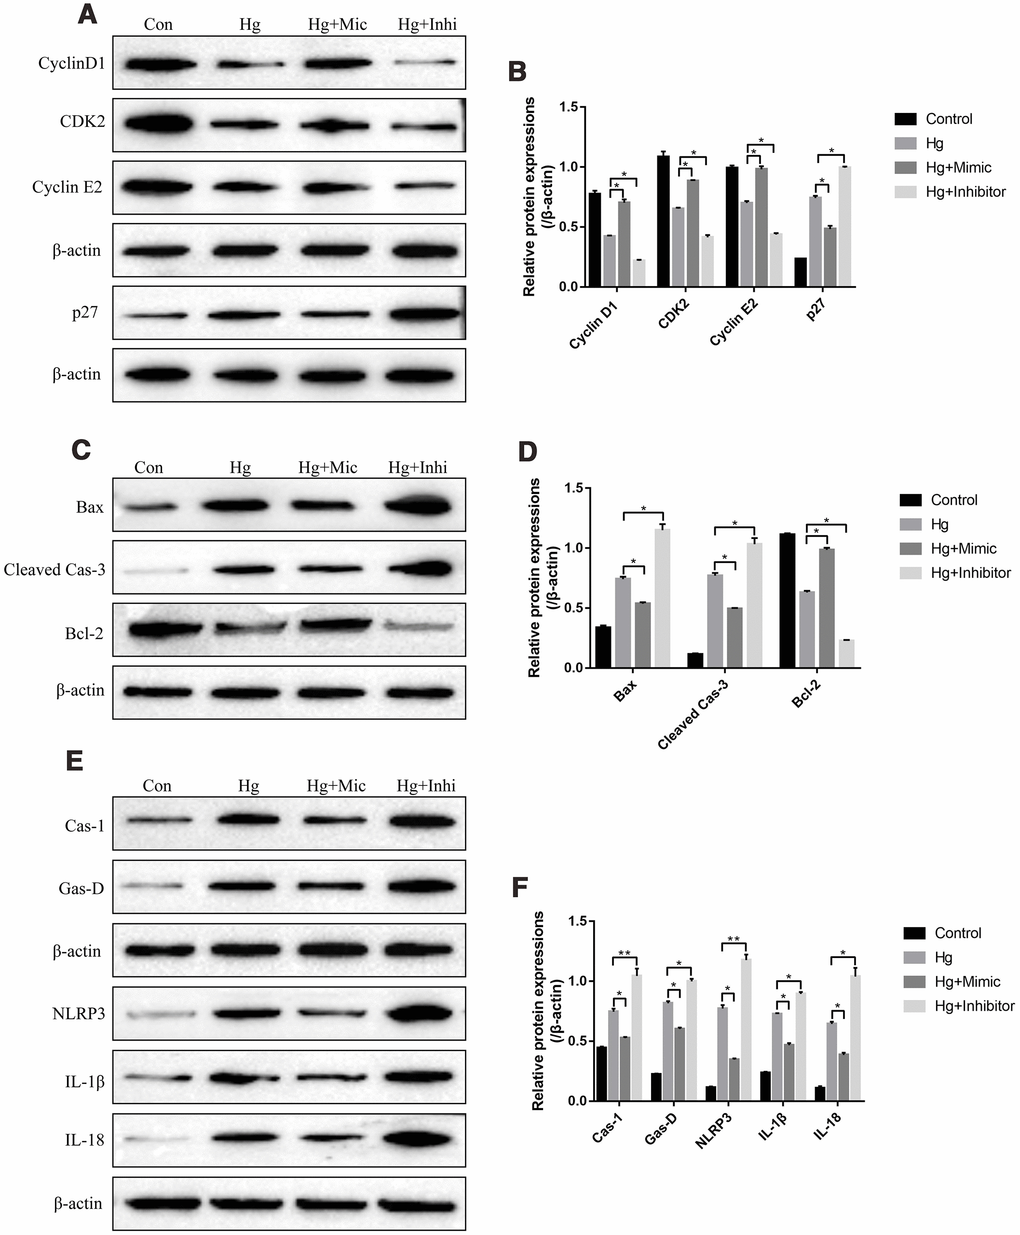 High-glucose regulated RPE cell functions by downregulating miR-25-3p. Western Blot was conducted to determine the expressions of (A, B) proliferation associated proteins (Cyclin D1, CDK2 and Cyclin E2), (C, D) apoptosis associated proteins (Bax, cleaved caspase-3 and Bcl-2) and (E, F) pyroptosis associated proteins (Caspase-1, Gasdermin D, NLRP3, IL-1β and IL-18) in RPE cells. (“Con” means “Control”, “Hg” means “High-glucose”, “Mic” means “miR-25-3p mimic” and “Inhi” means “miR-25-3p inhibitor”). Each experiment had at least 3 repetitions, the data were collected and represented as Mean ± SD. “*” means p p 